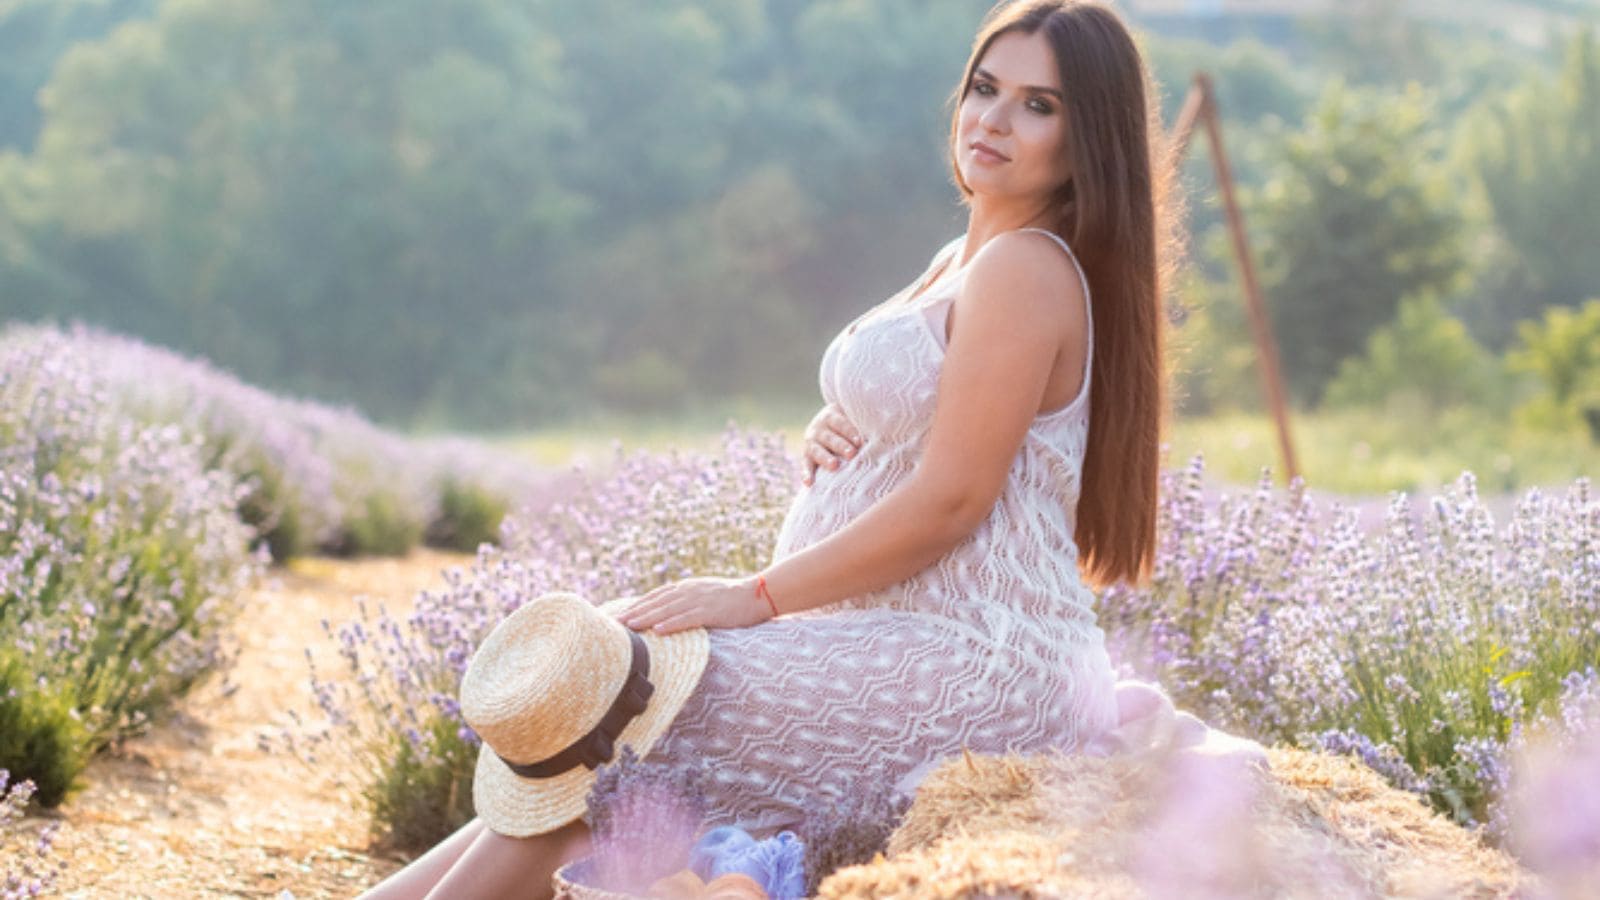 Pregnant woman wearing maternity dress in violet lavender field looking at camera